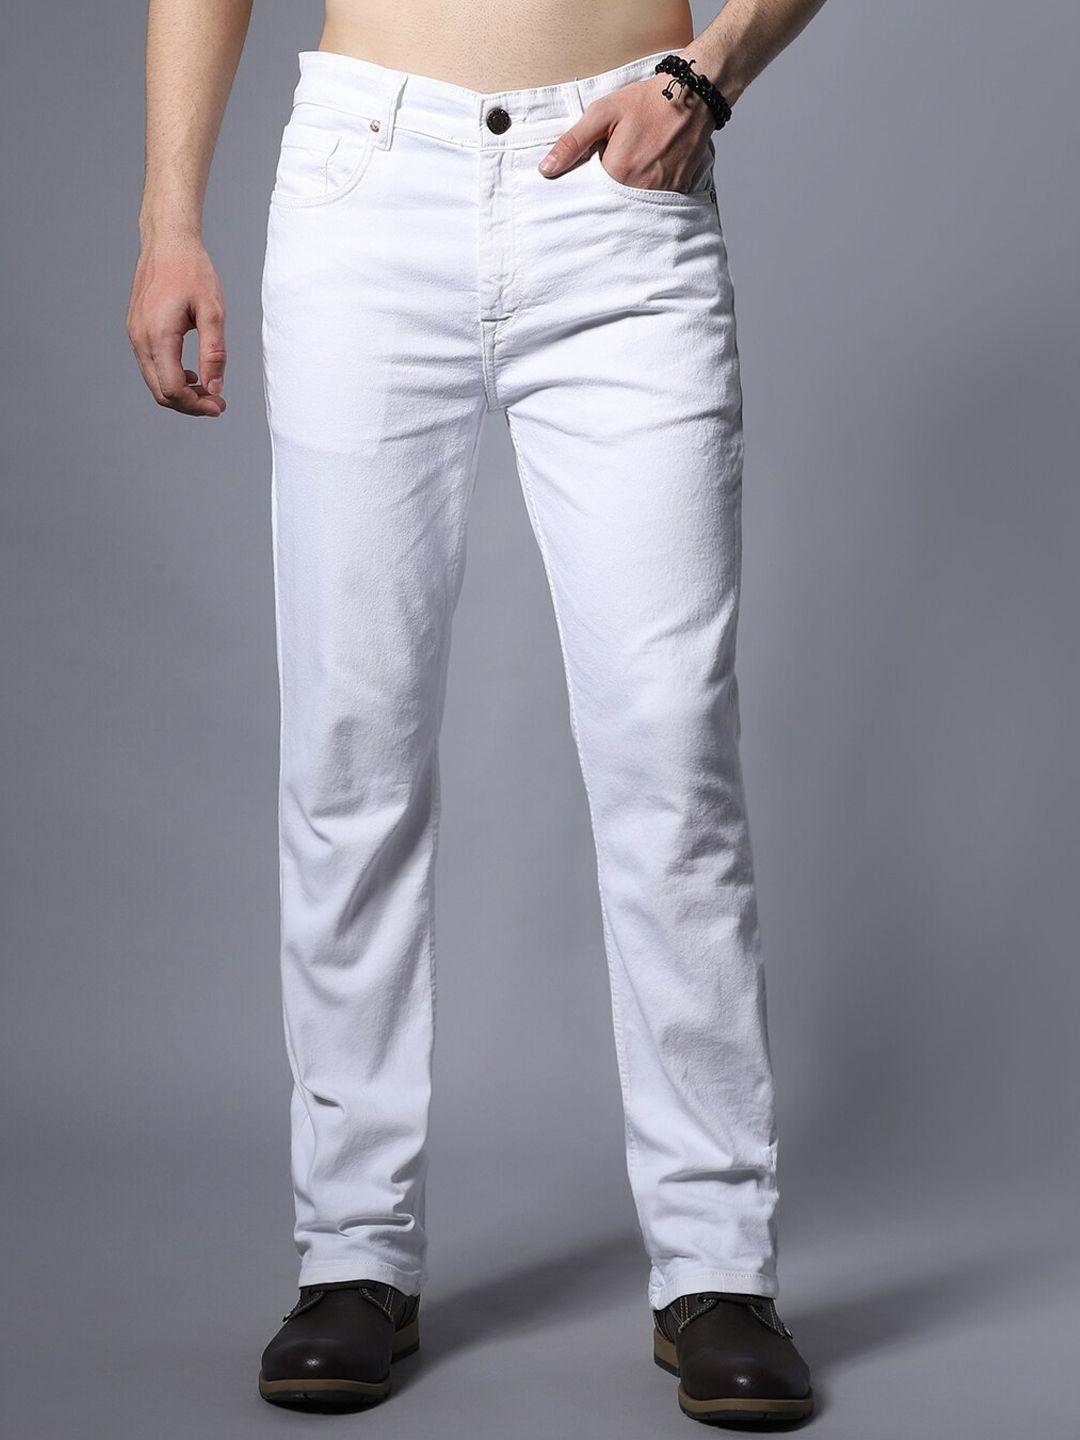 high-star-men-low-rise-regular-fit-clean-look-stretchable-jeans